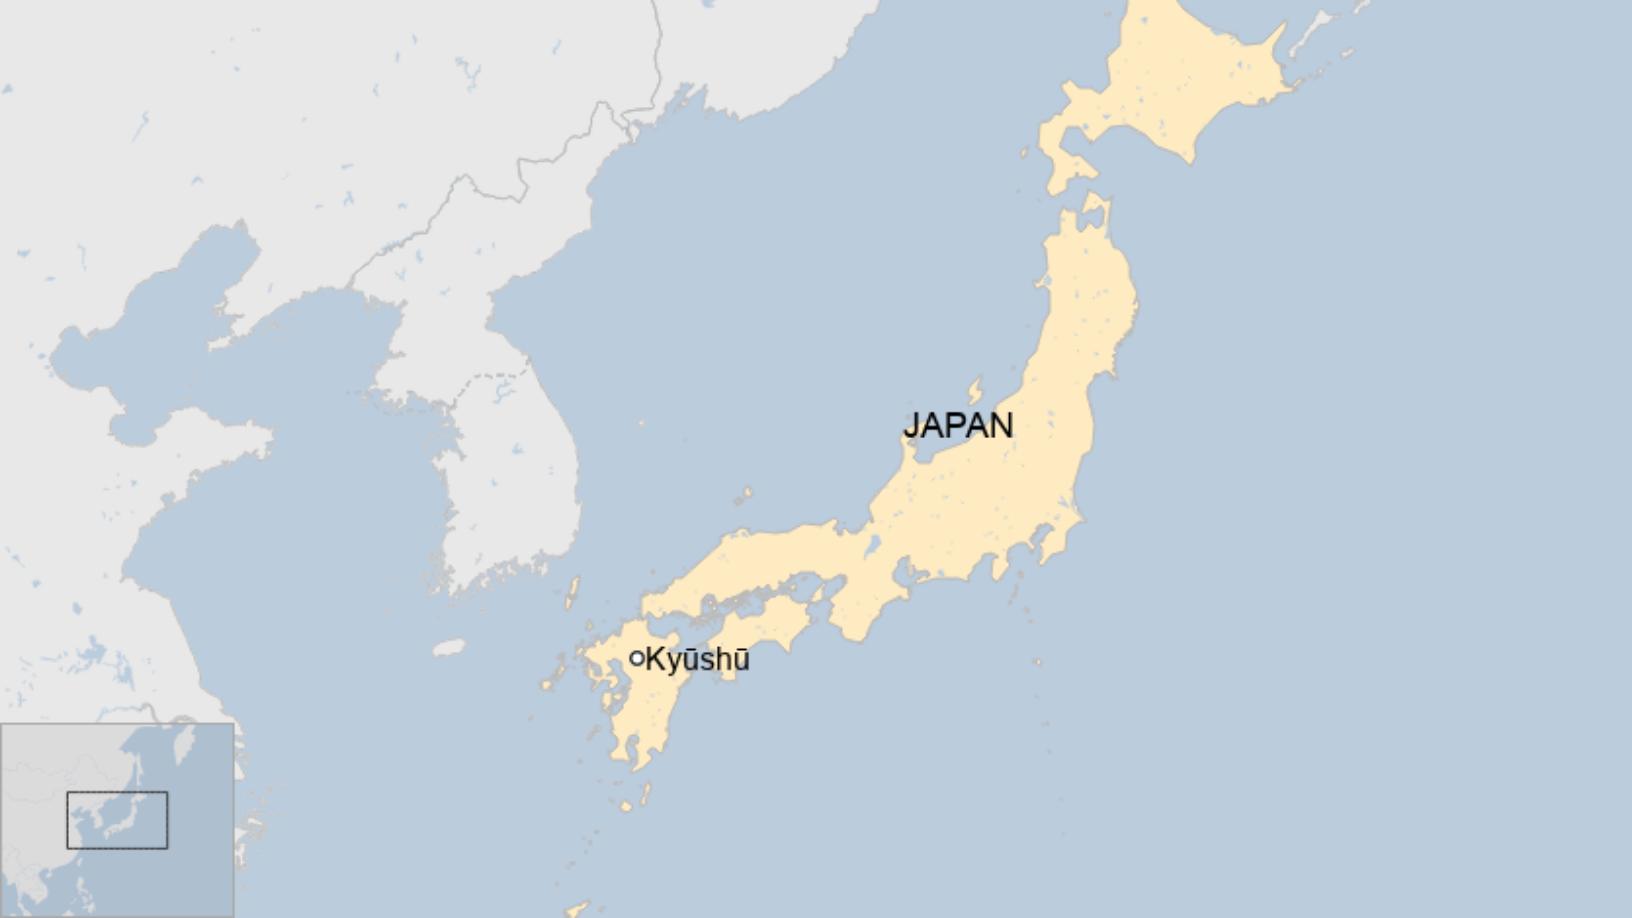 Map: A map of Kyushu, Japan